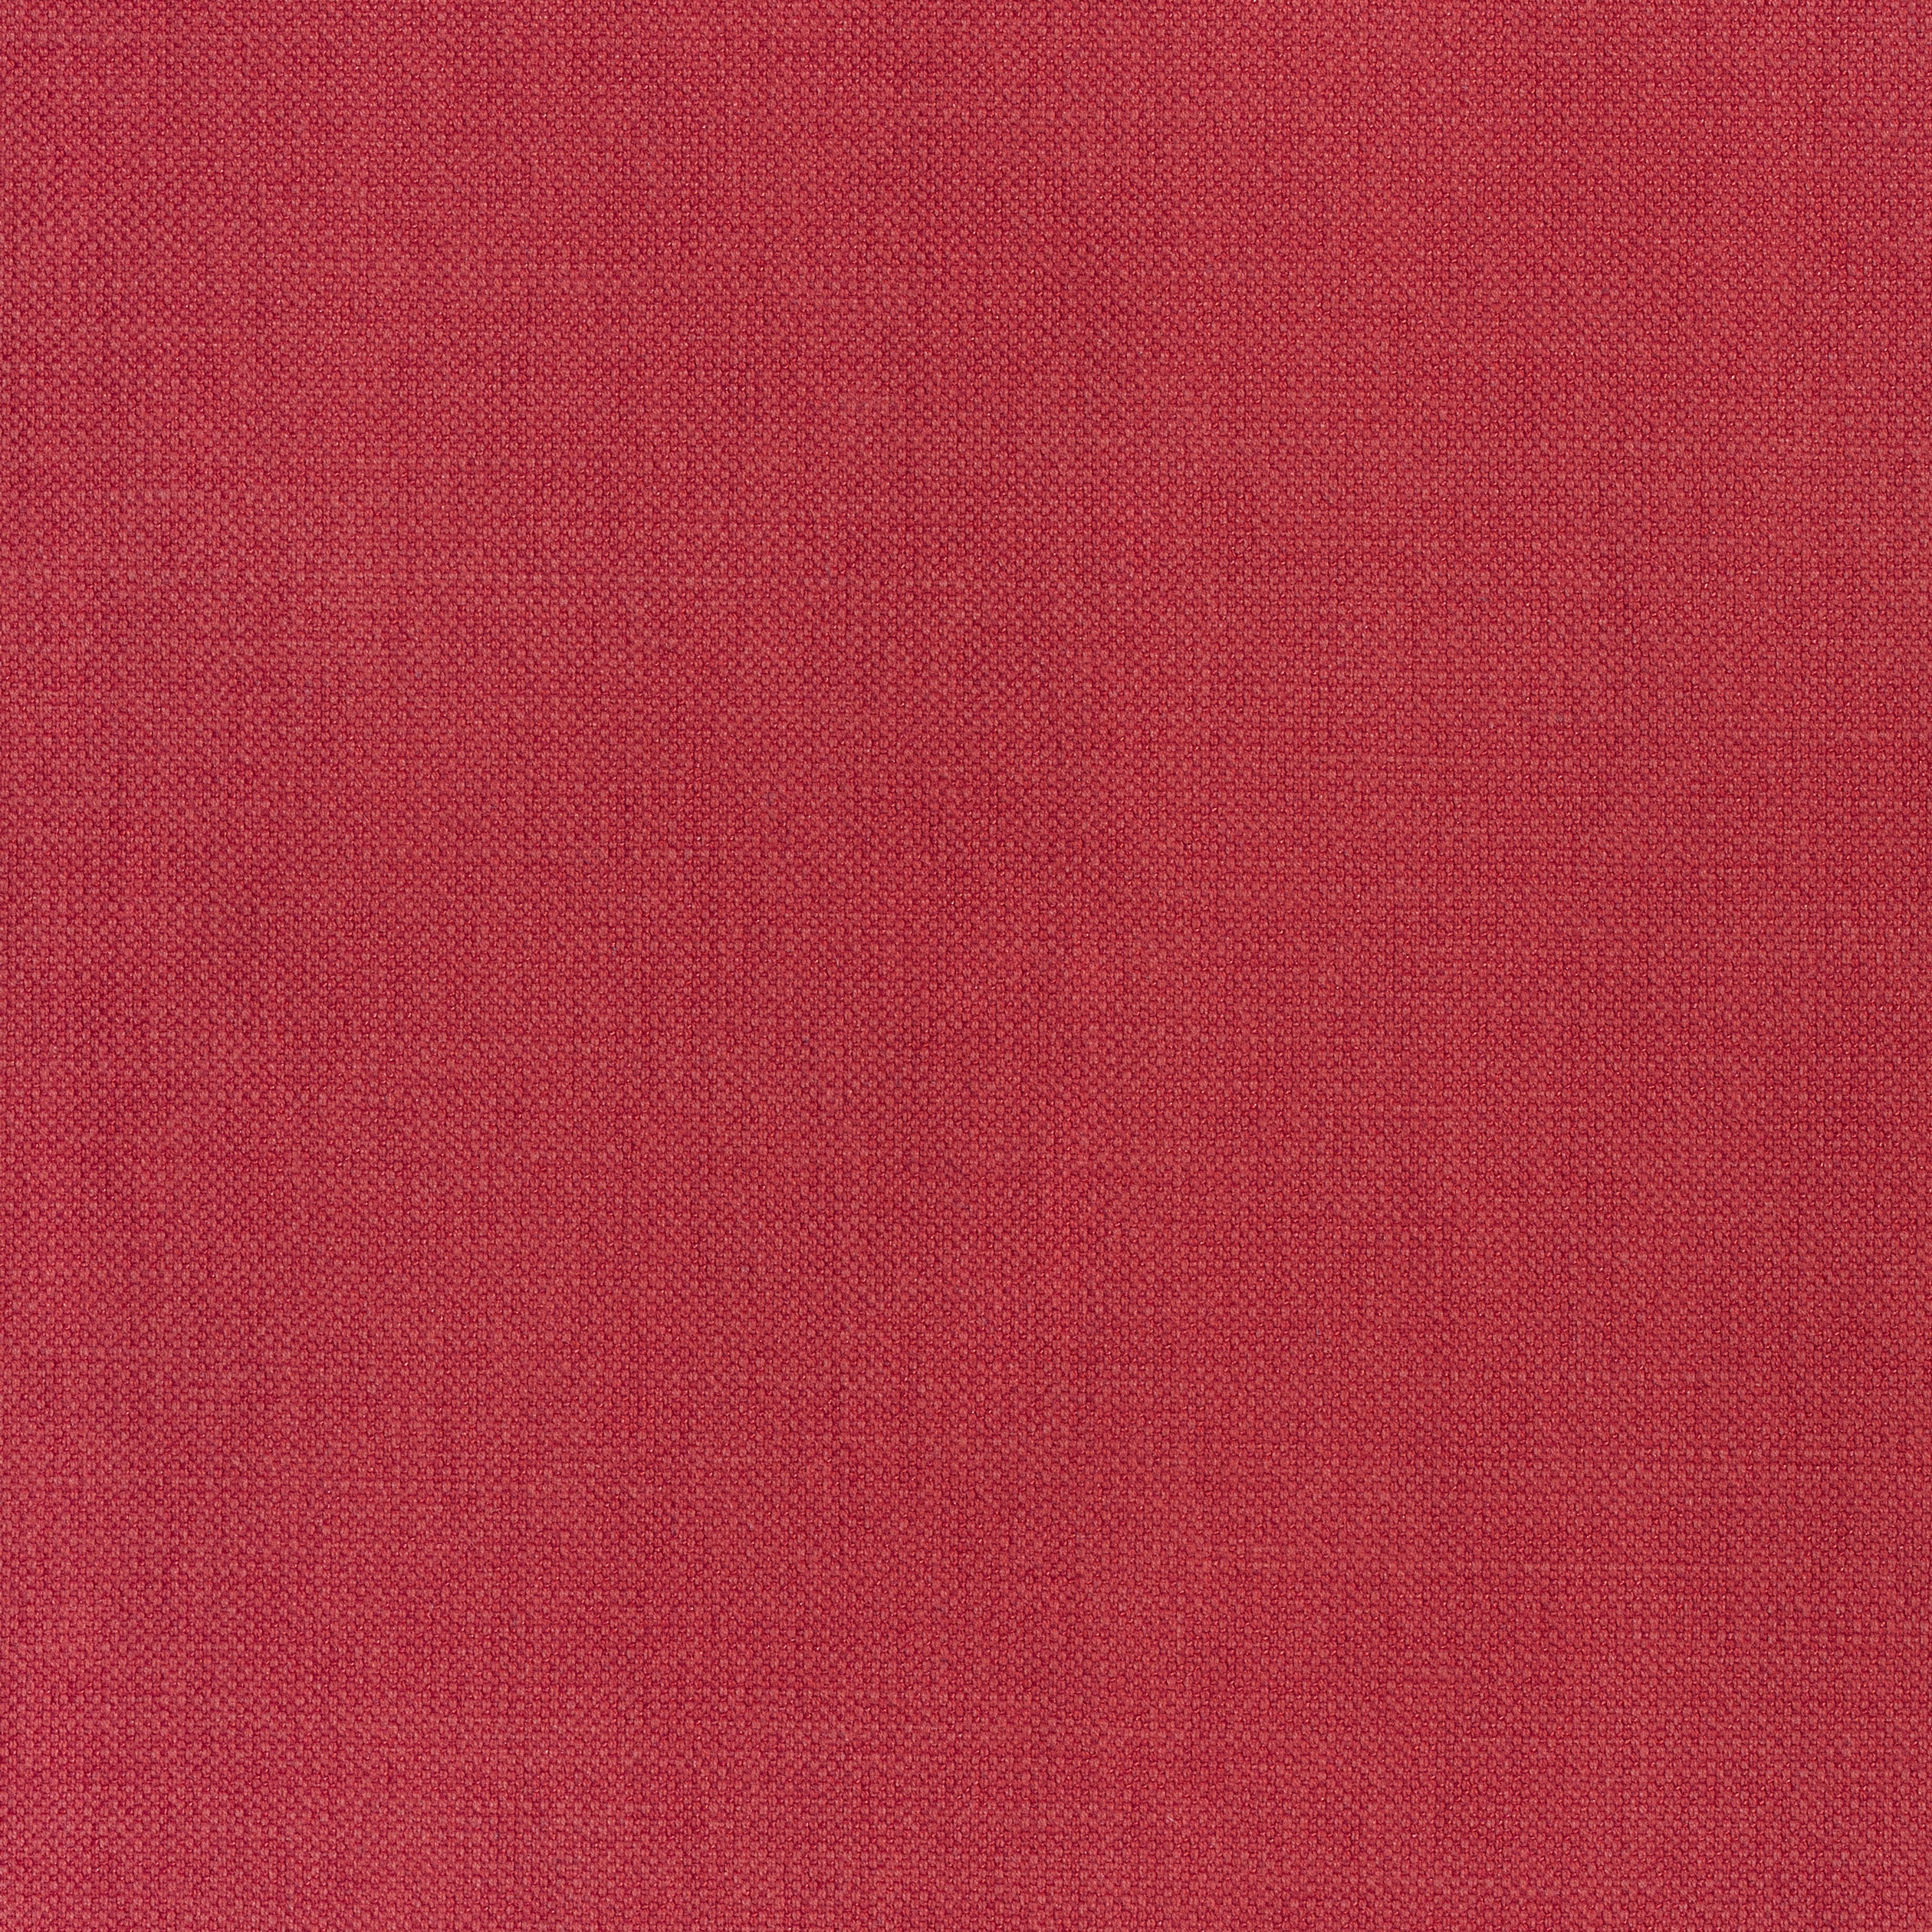 Prisma fabric in lipstick color - pattern number W70129 - by Thibaut in the Woven Resource Vol 12 Prisma Fabrics collection